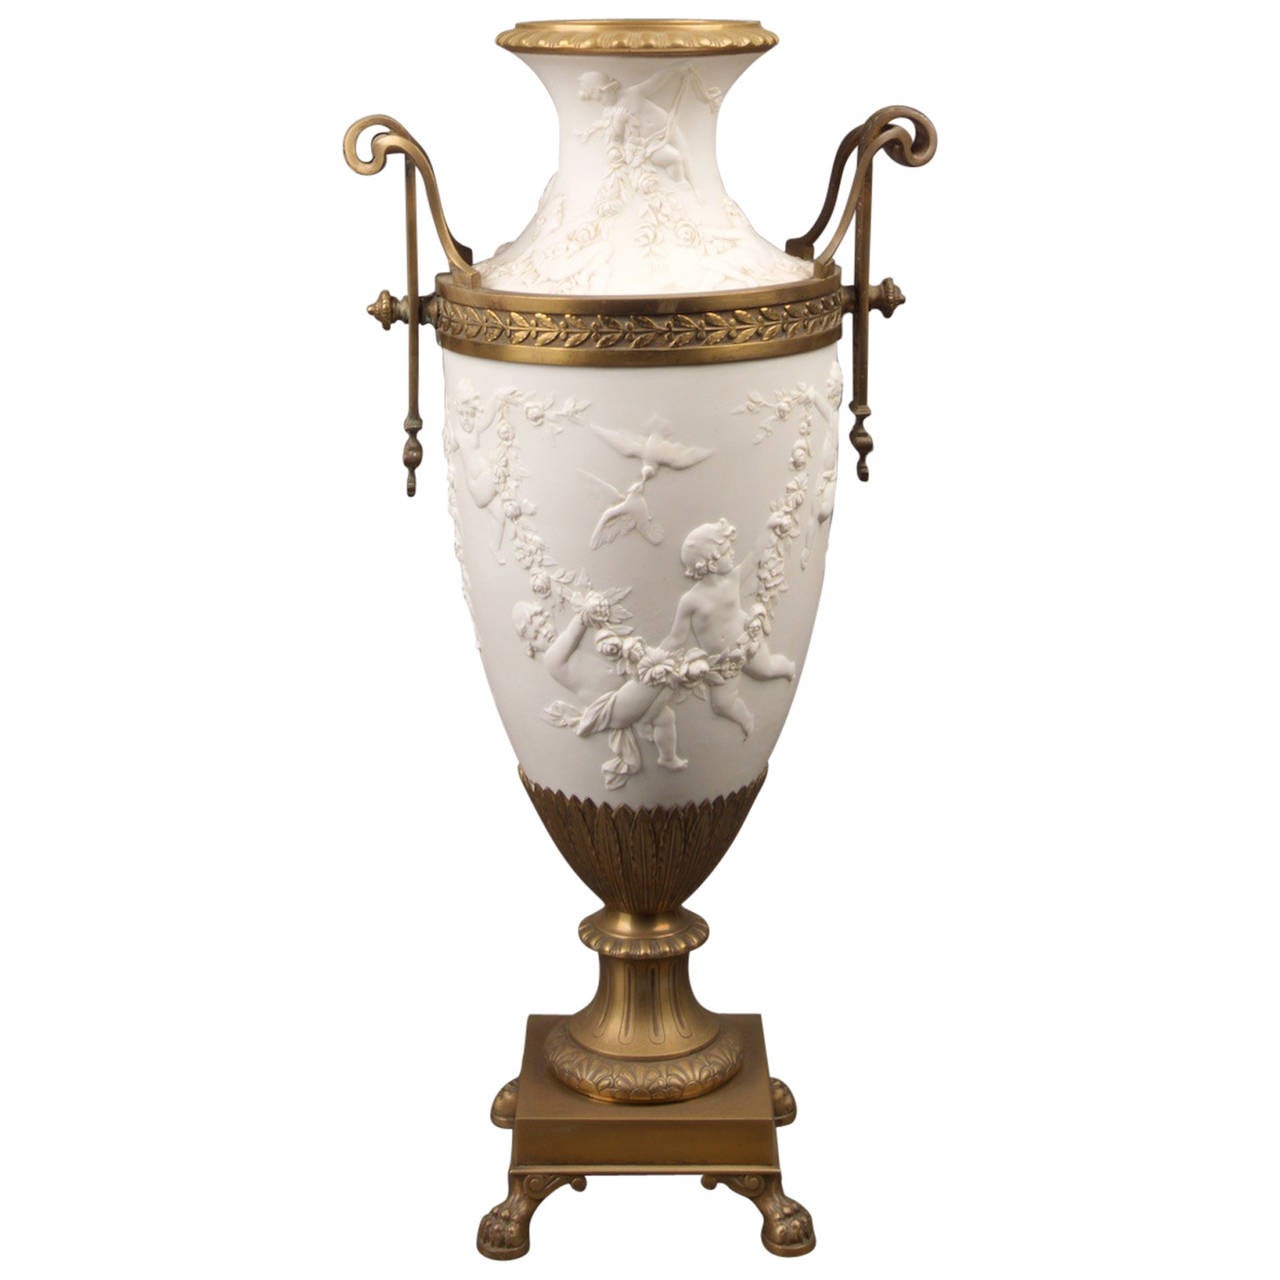 19th Century French Third Republic Ormolu and Bisque Urn For Sale